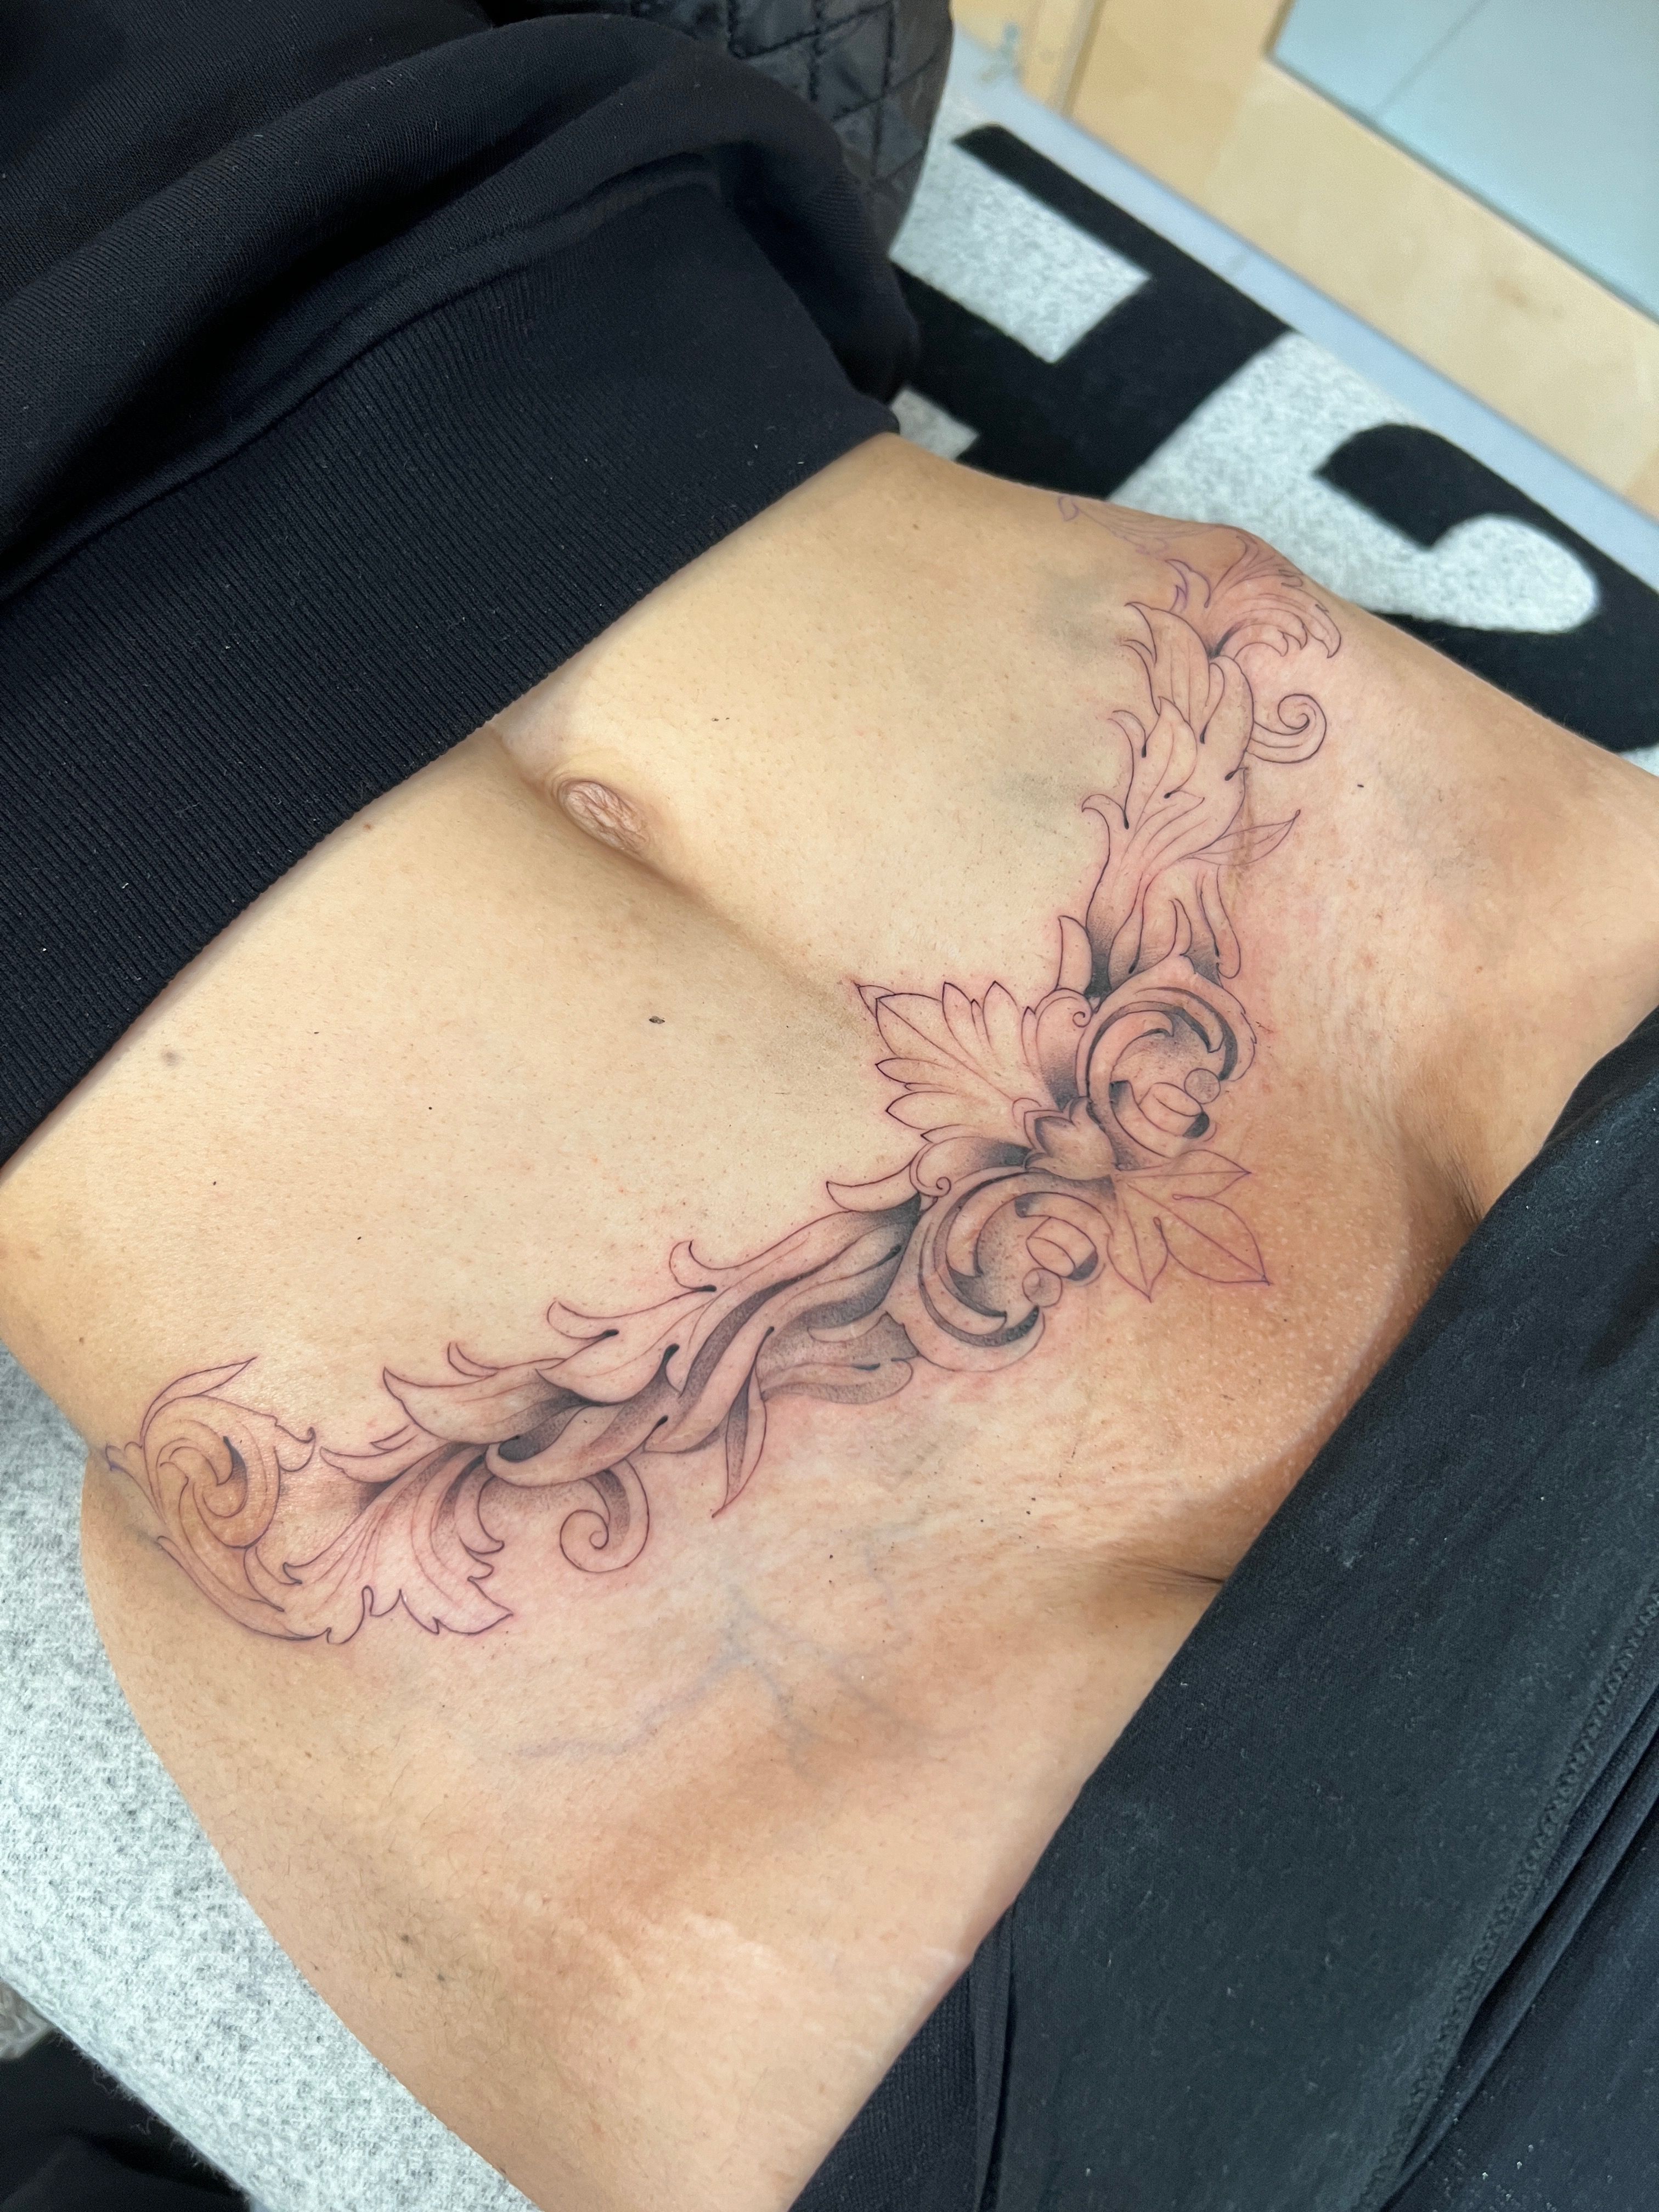 These Women Are Taking Ownership of Their Scars With Beautiful Tattoos